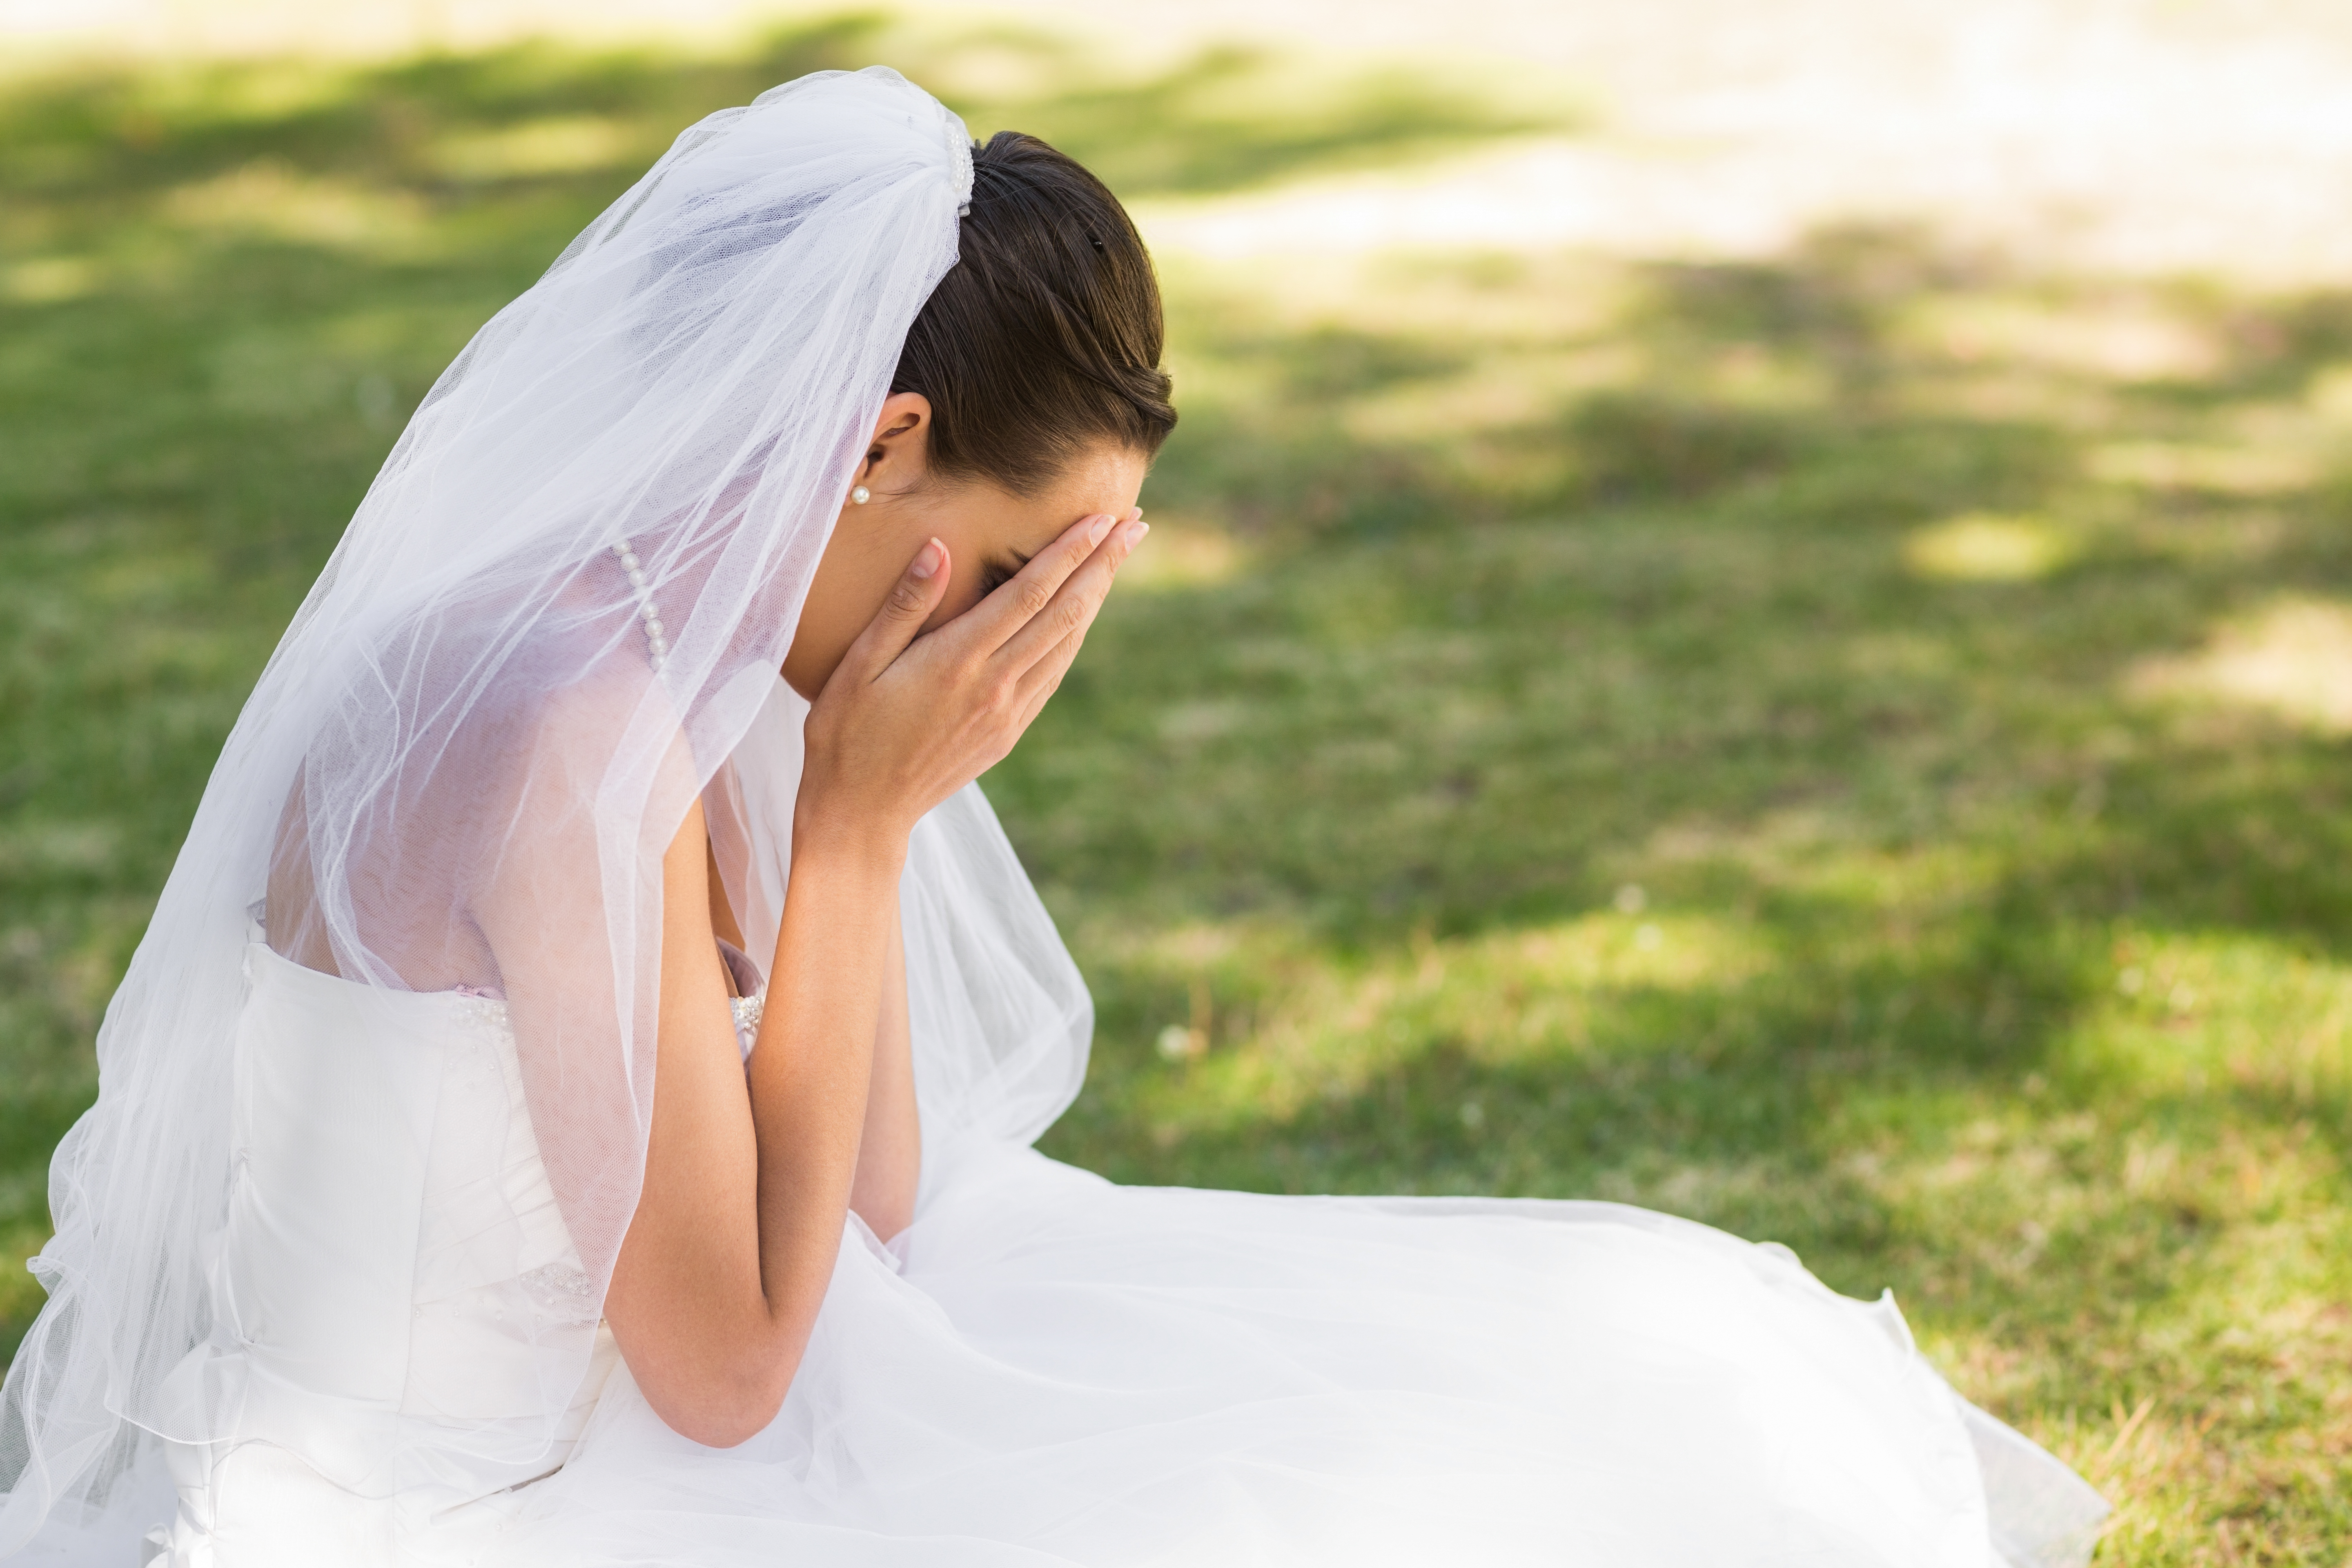 A woman sitting on the ground while covering her face with her hands | Source: Shutterstock